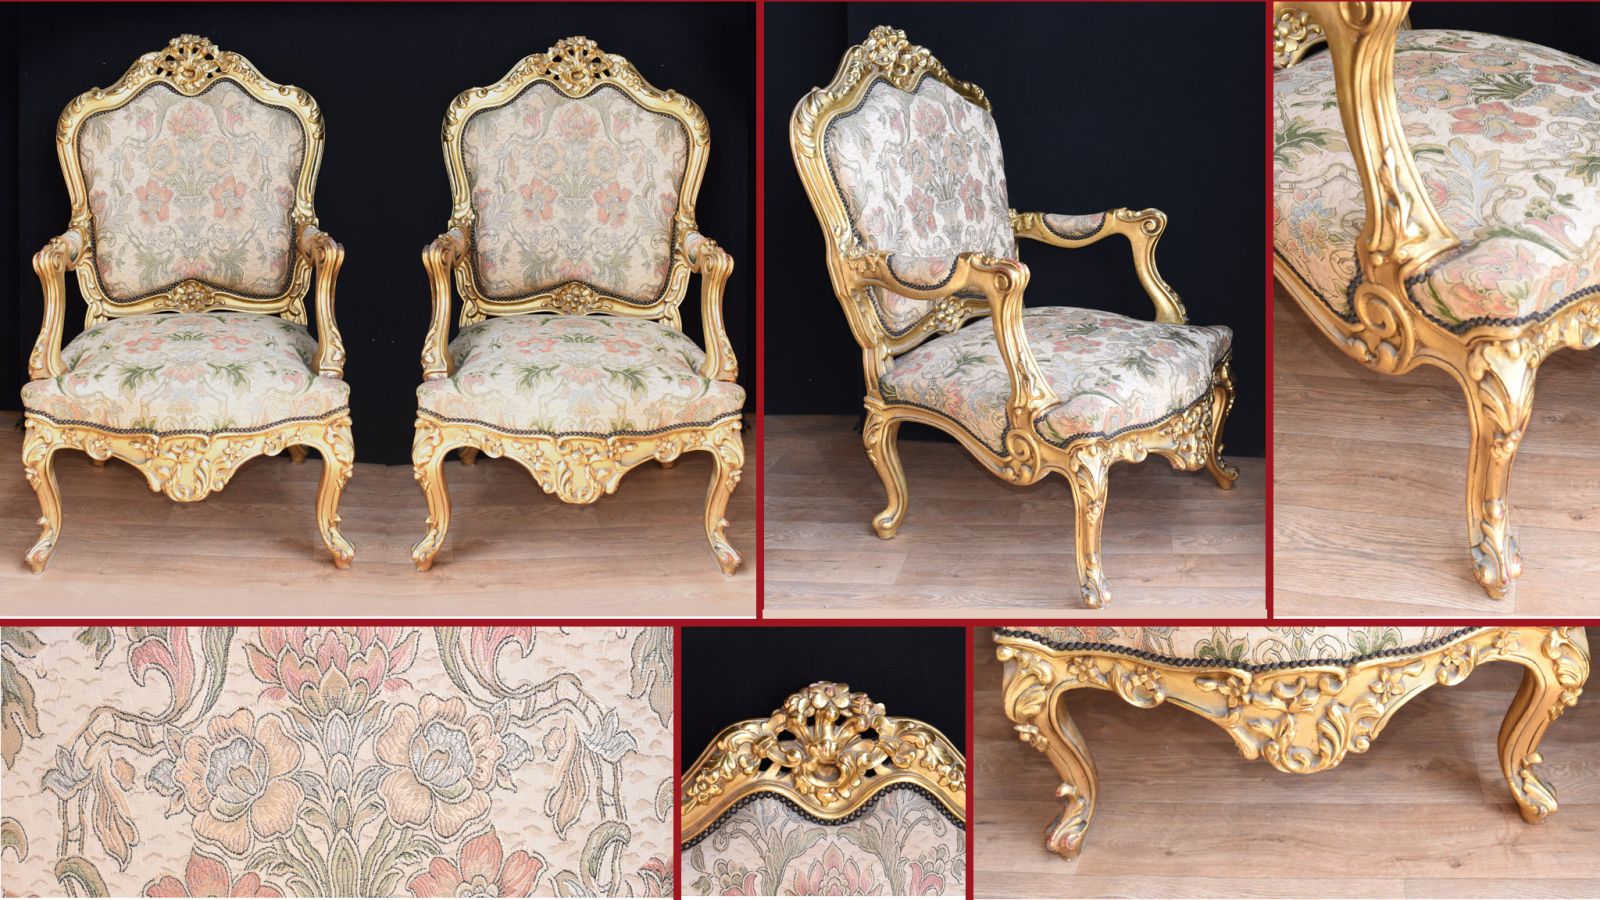 Gilt armchairs from Canonbury Antiques